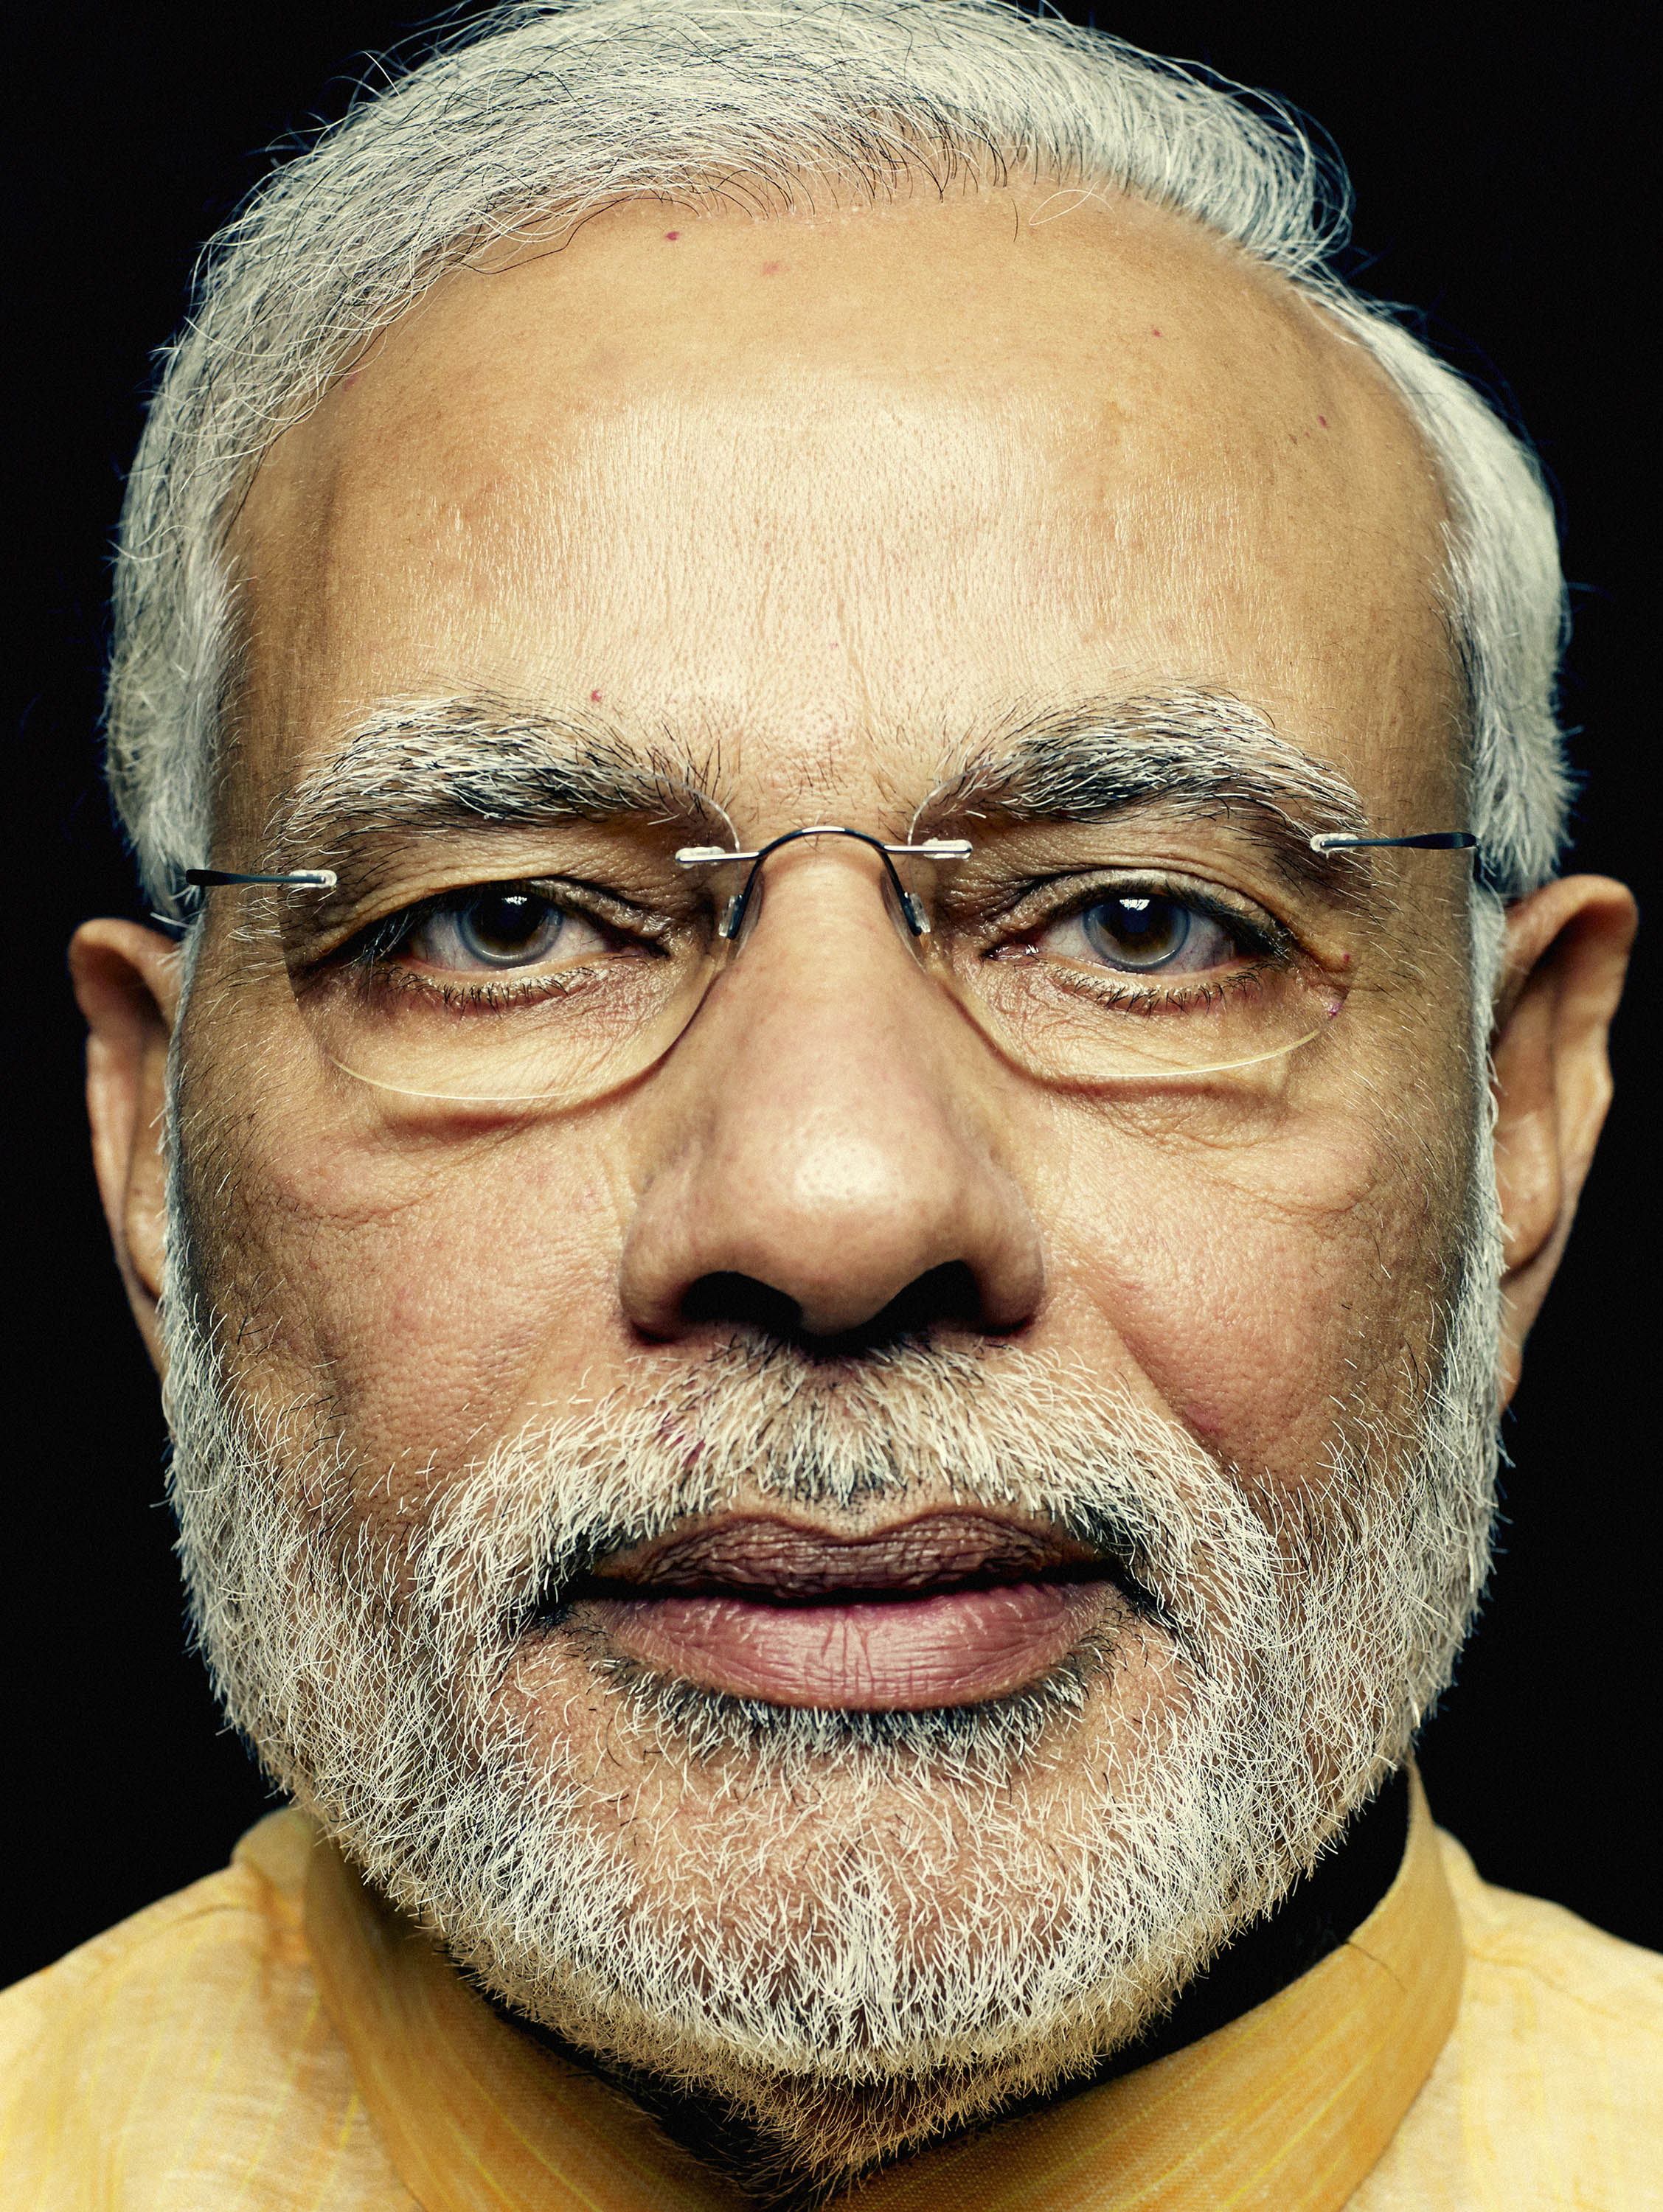 Narendra Modi wants to change India. Will he succeed? (Peter Hapak for TIME)